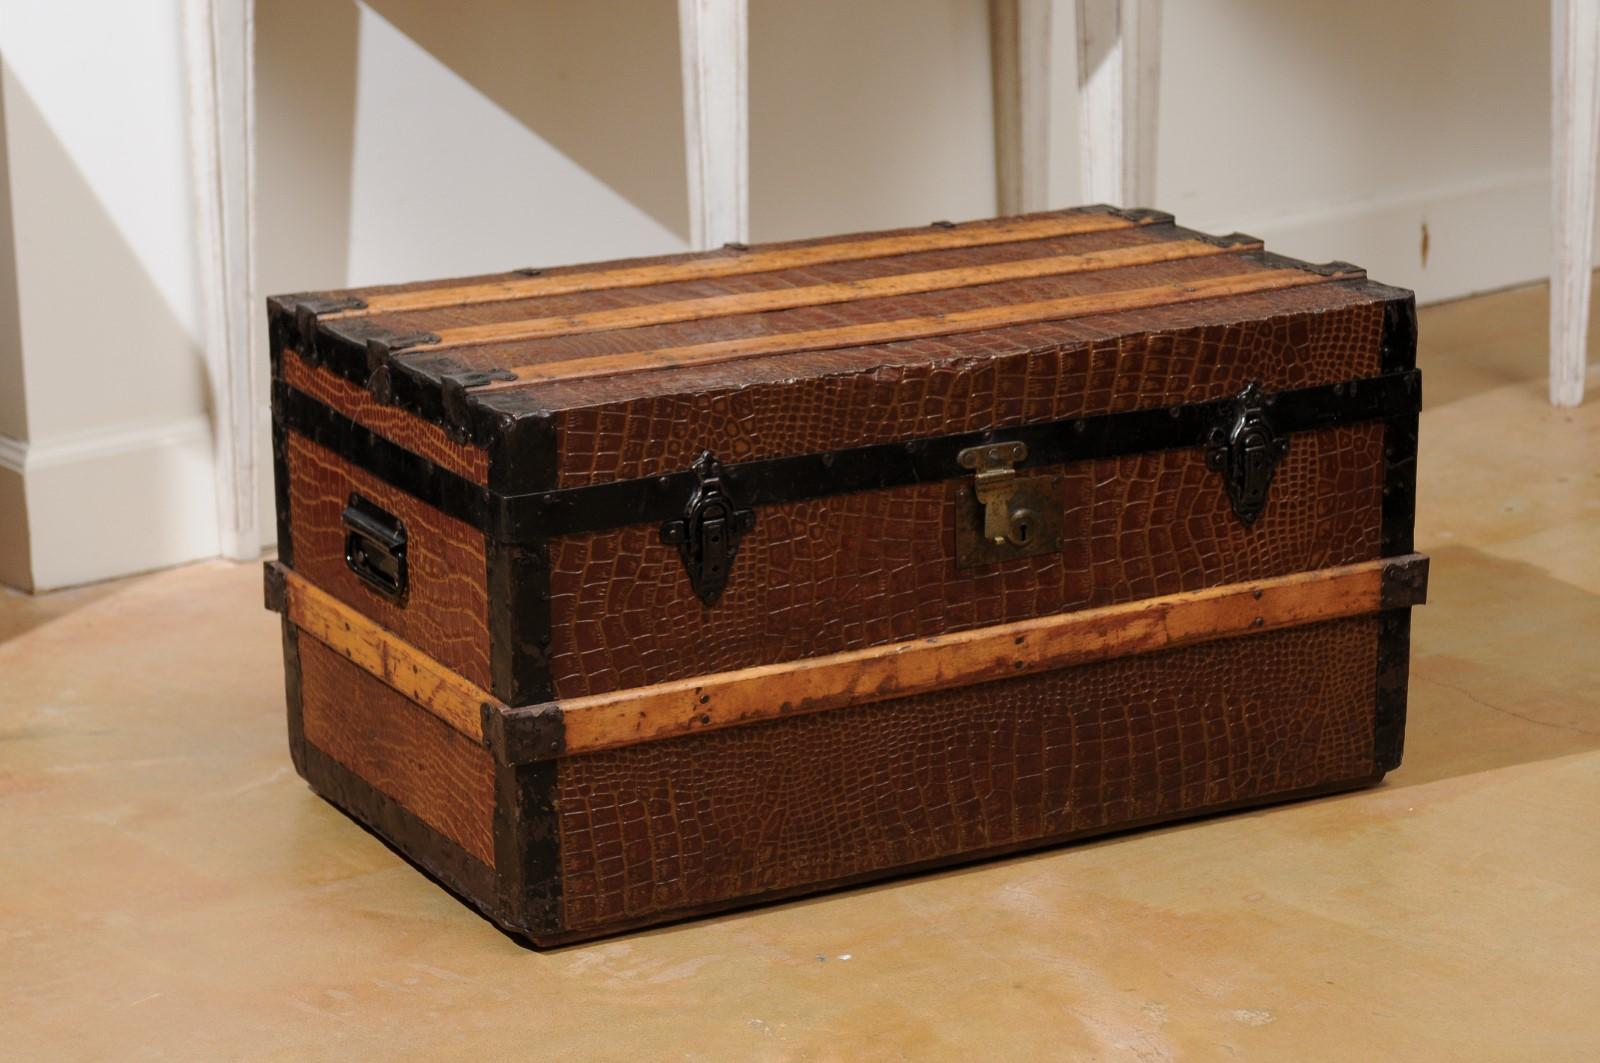 An English wood bound trunk from the 20th century, with iron details. Born in England during the 20th century, this handsome trunk features a linear silhouette perfectly accented by a textured surface and iron details. The hinged lid opens to reveal